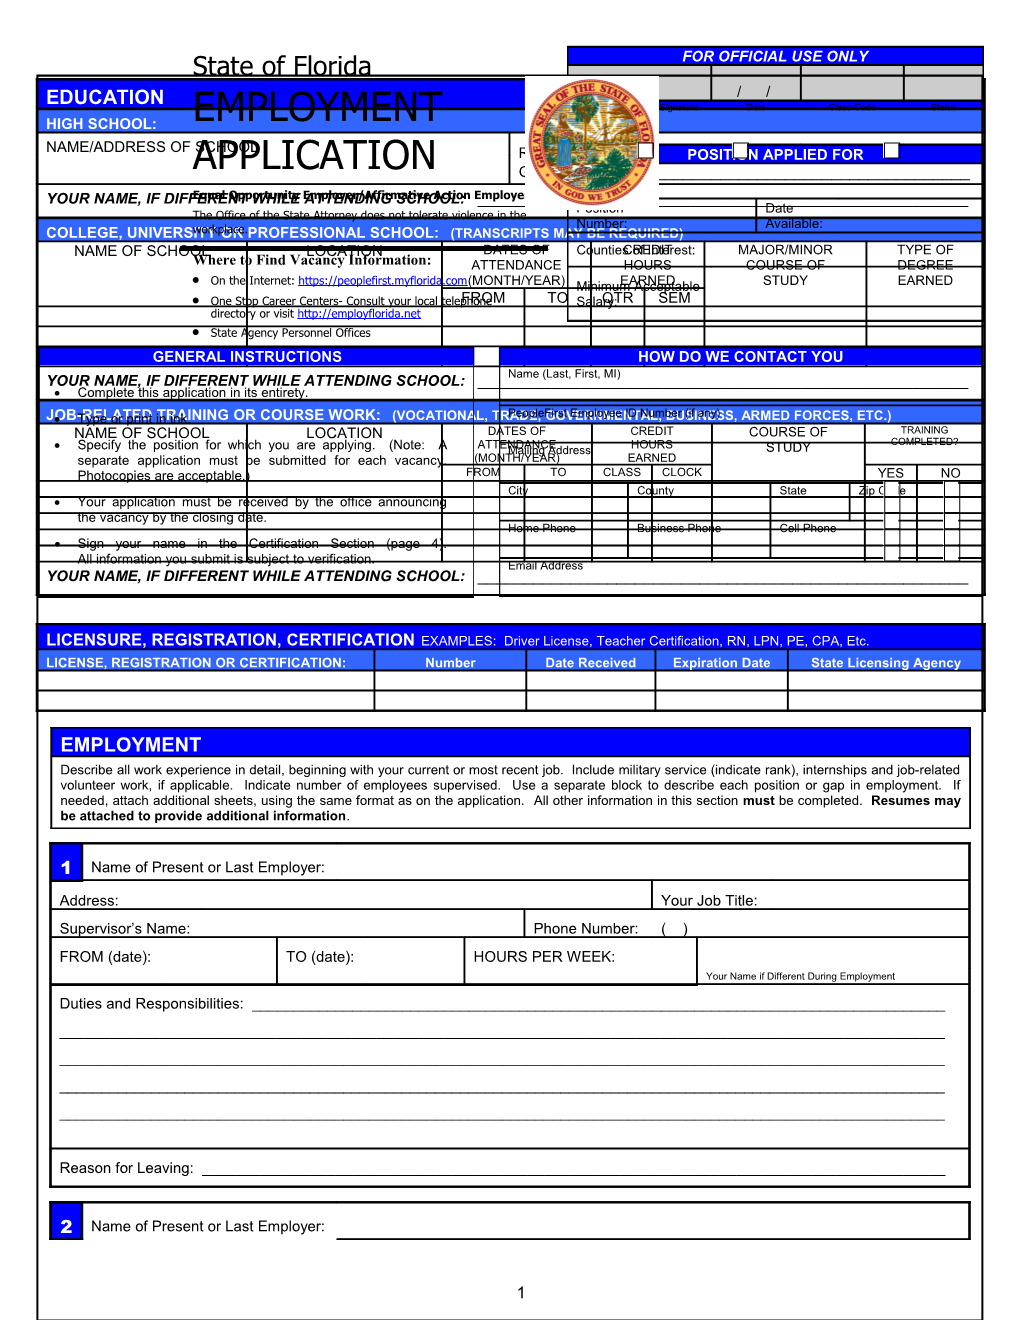 State of Florida Employment Application